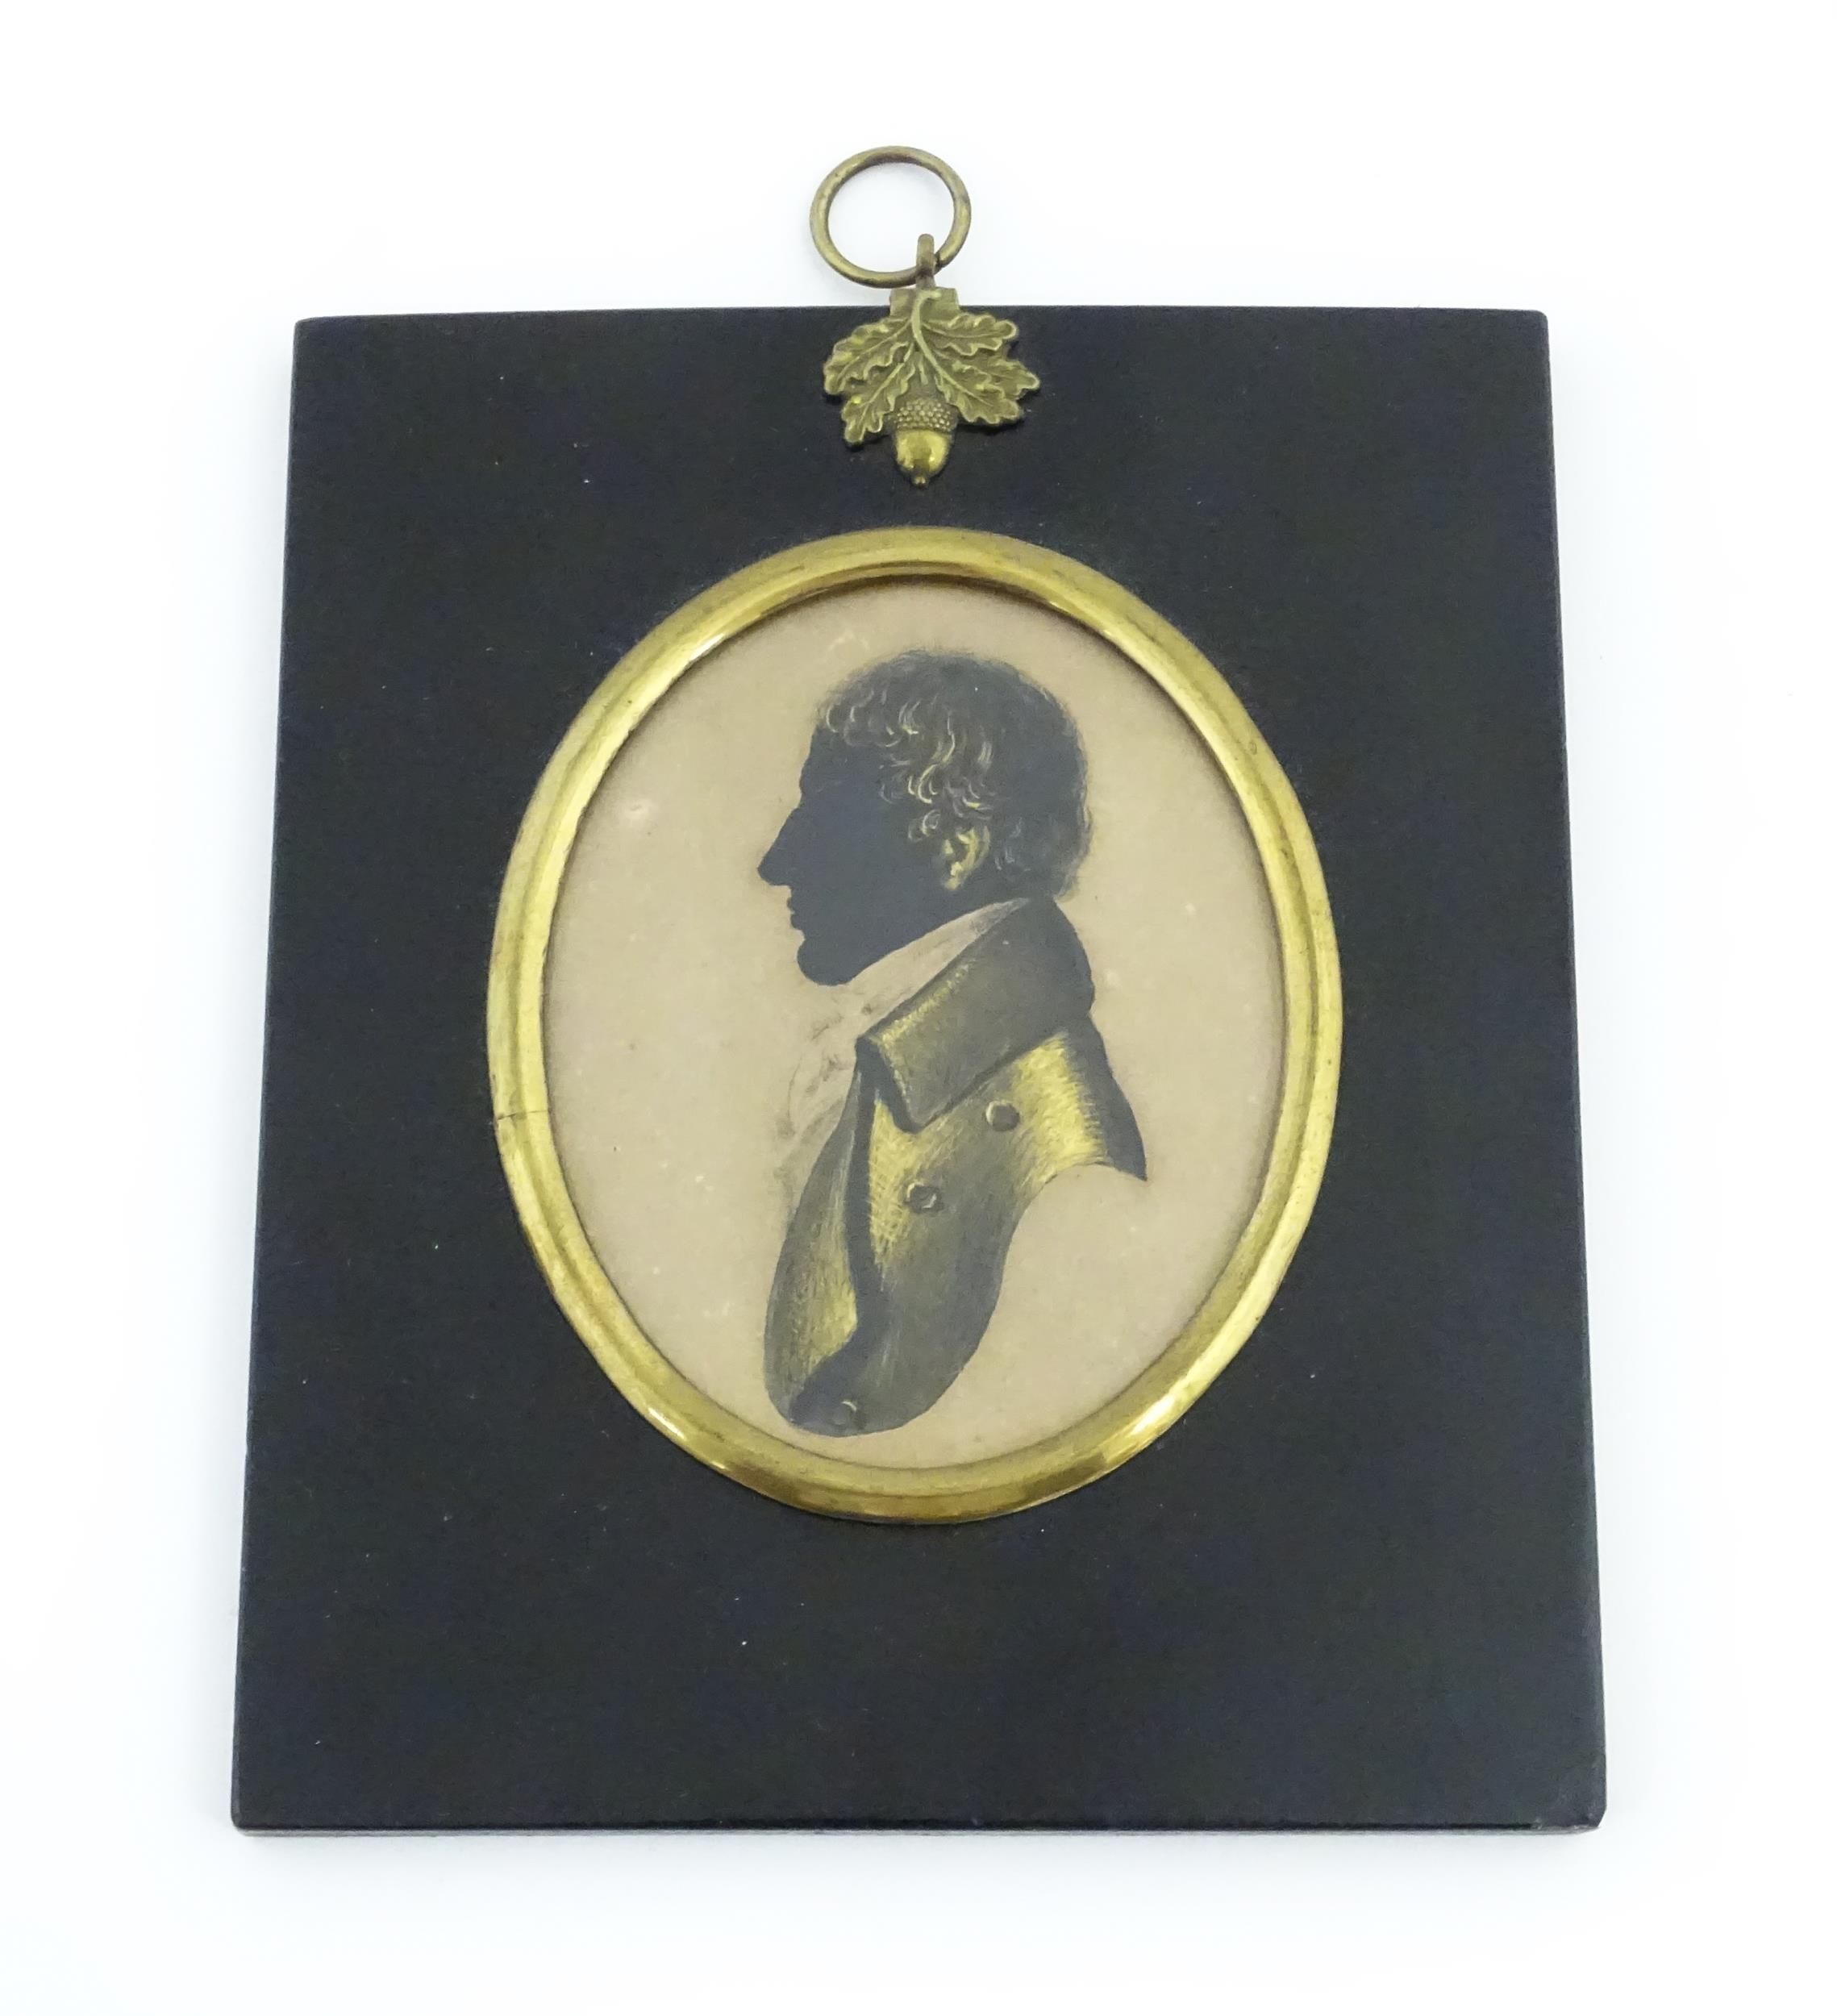 A 19thC silhouette portrait miniature depicting Charles Lamb, aged 23, with gilt highlights, after - Image 3 of 6